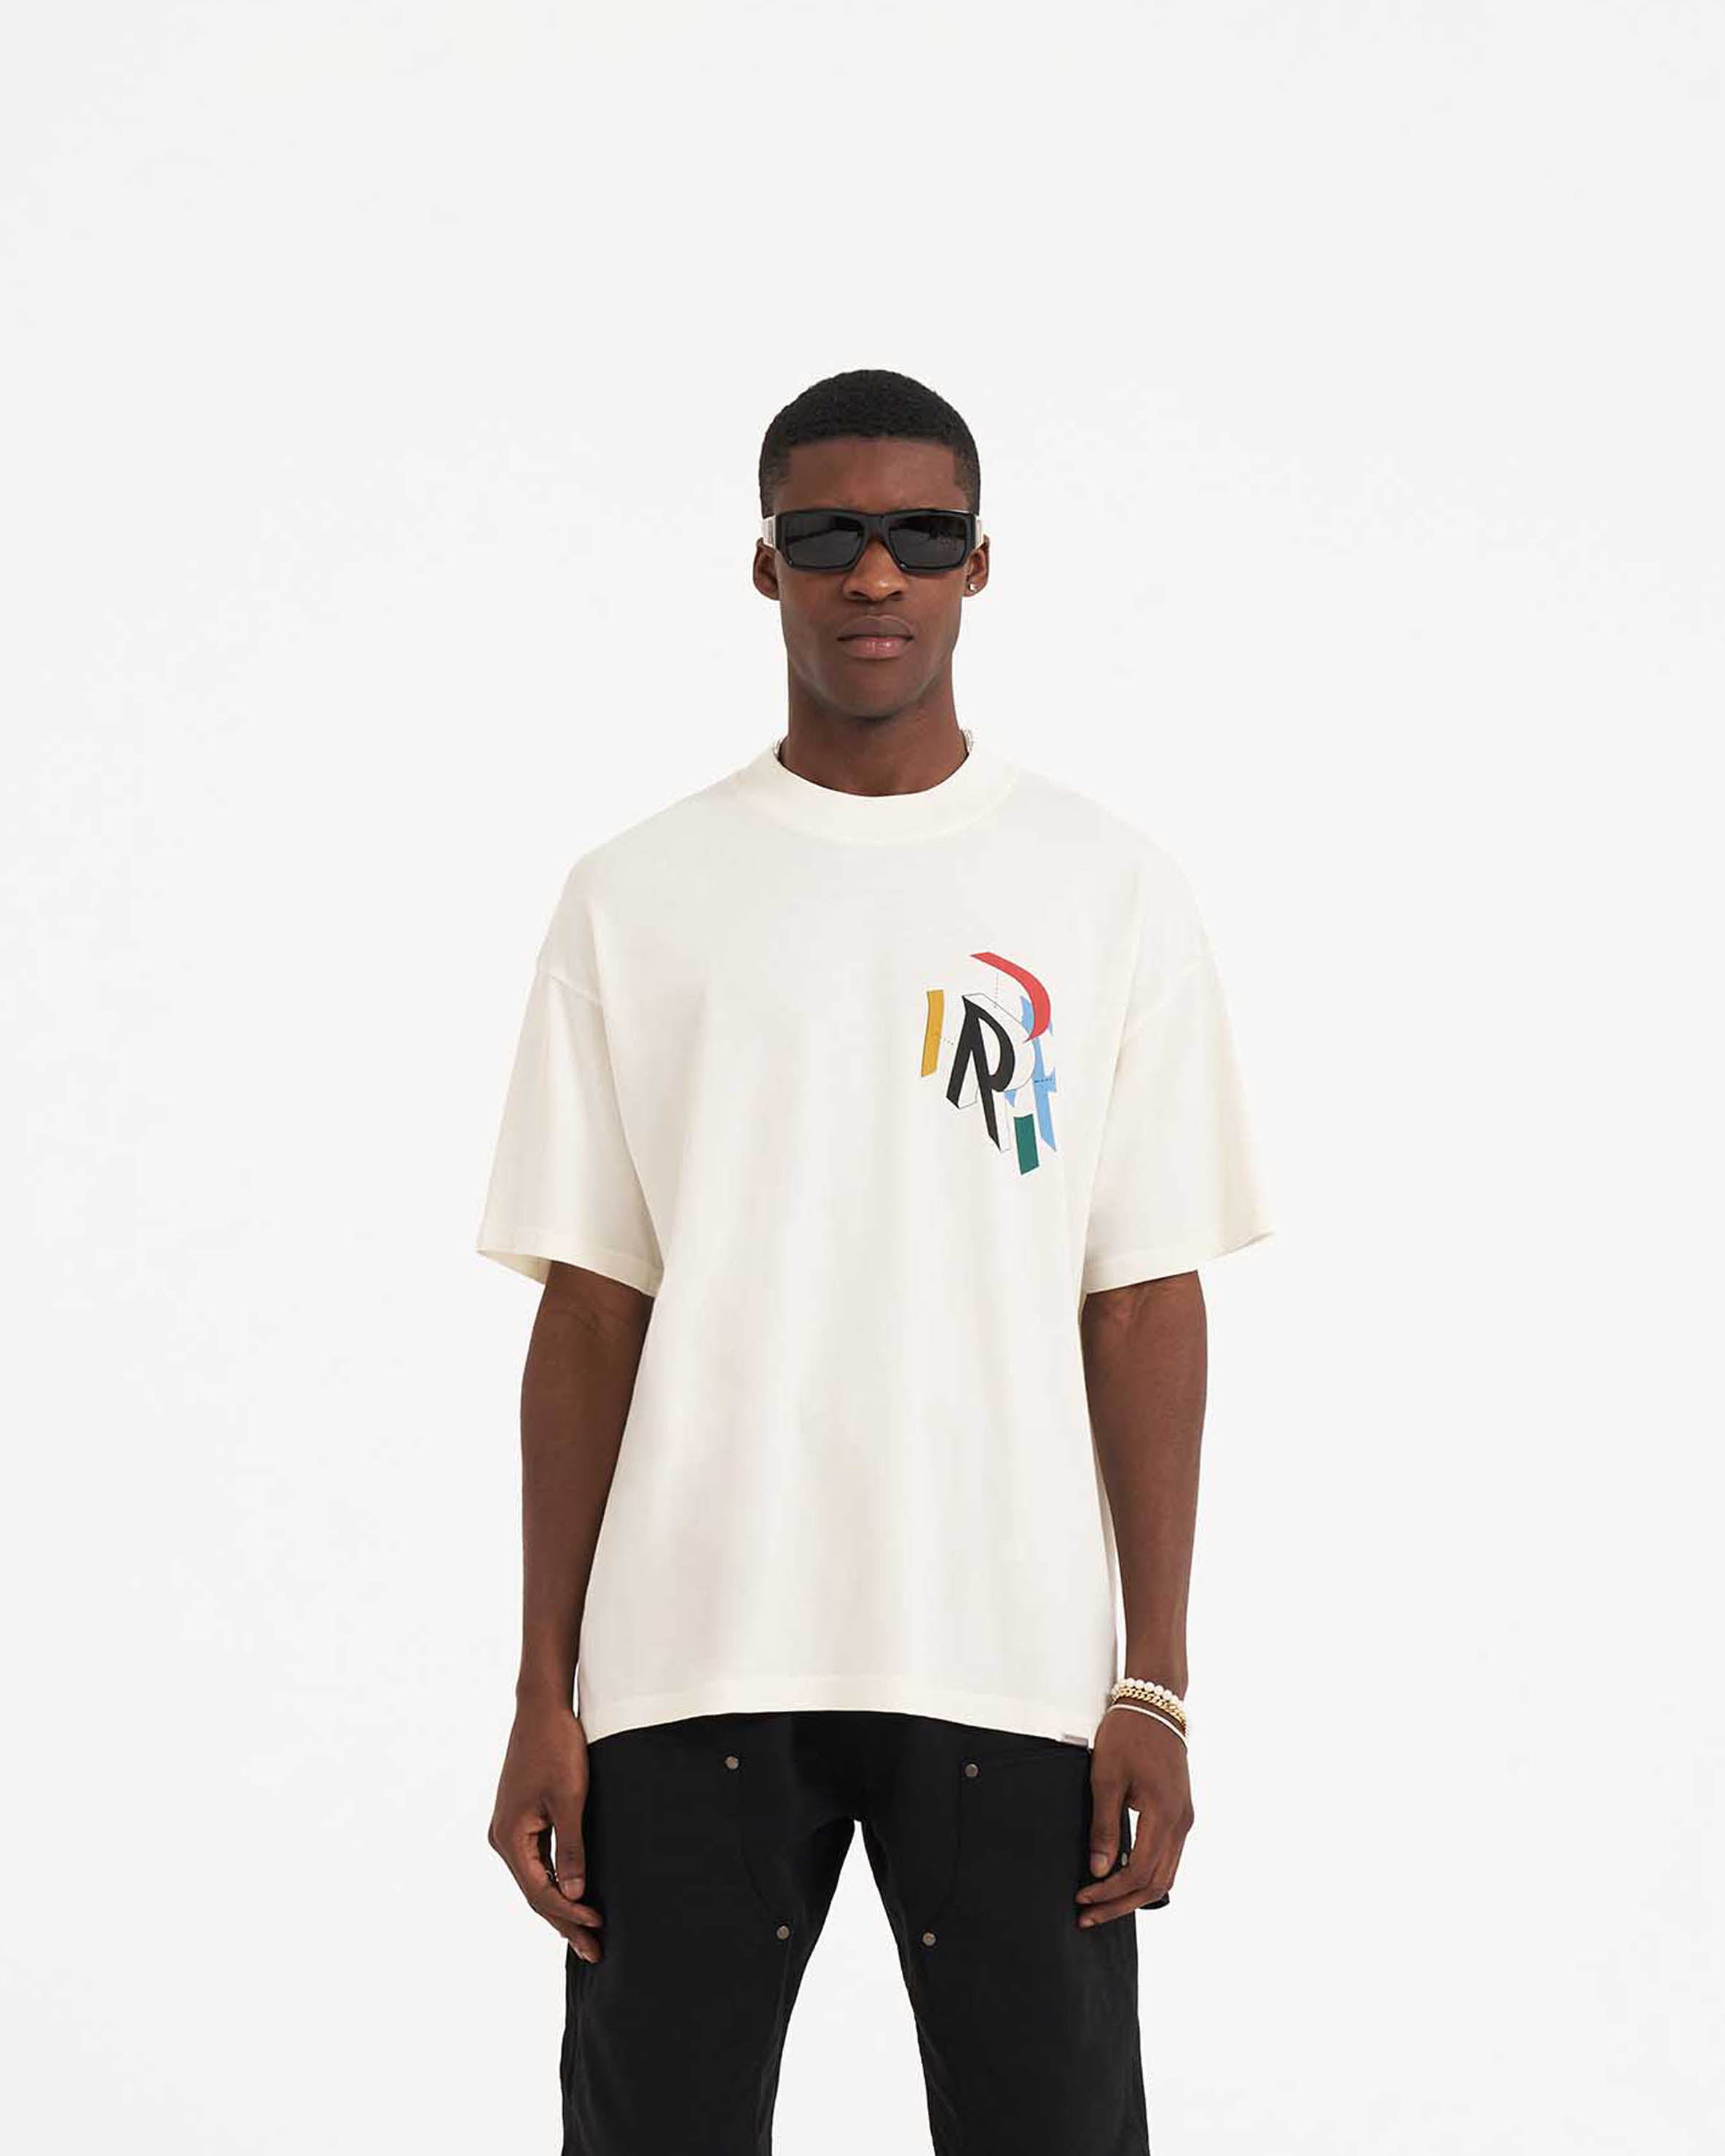 Initial Assembly T-Shirt - Flat White